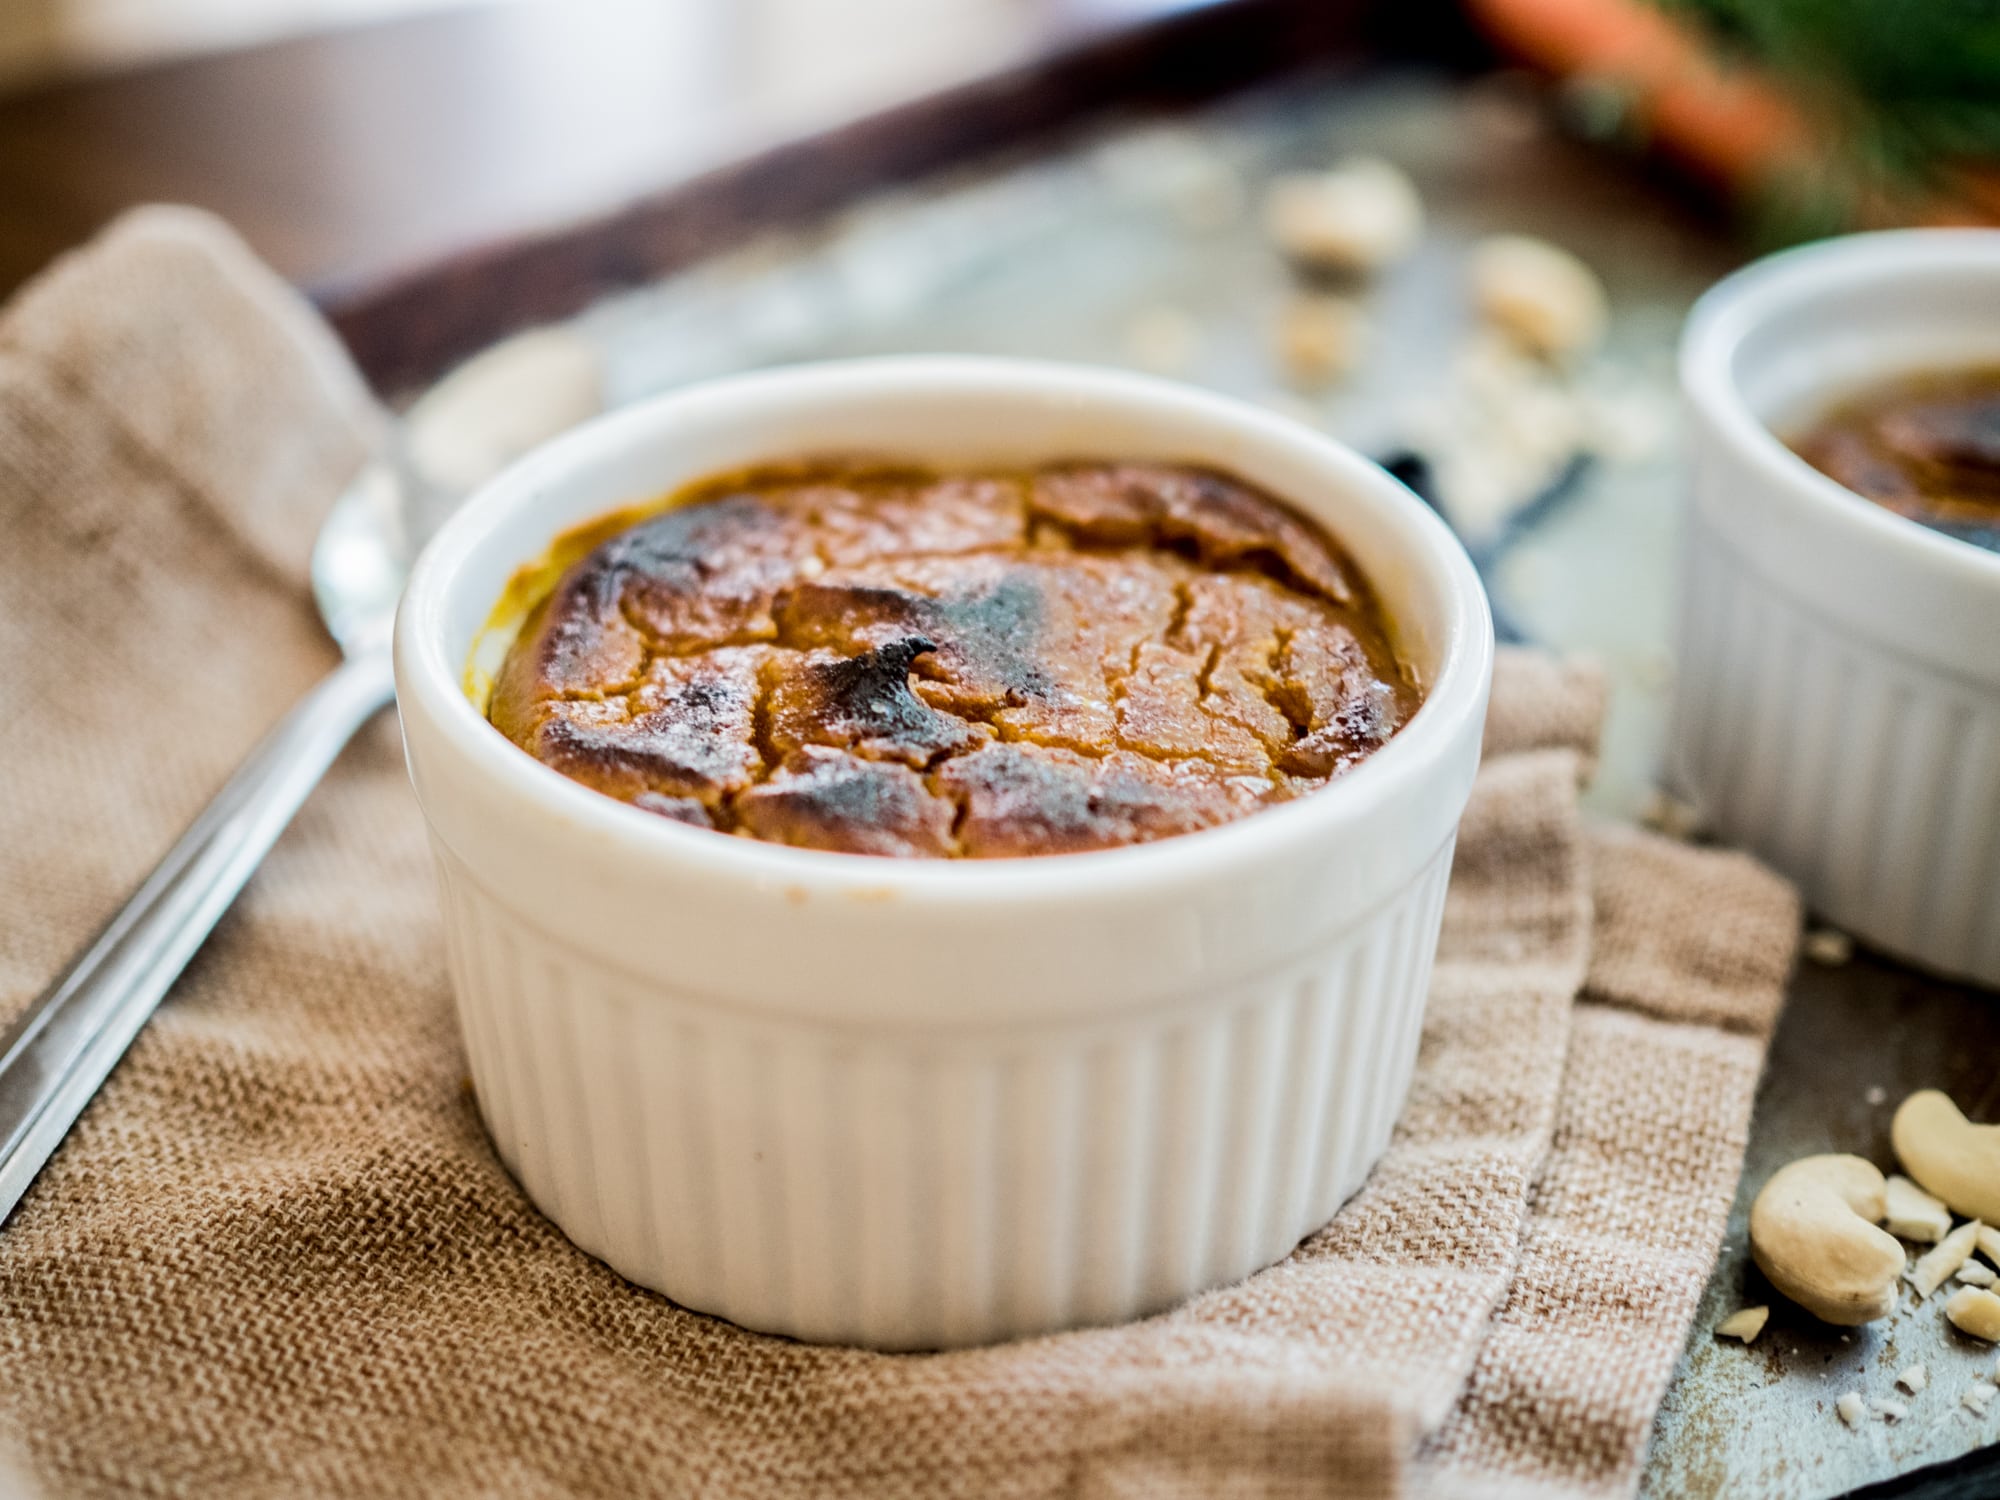 Carrot brulee | WhyFoodWorks